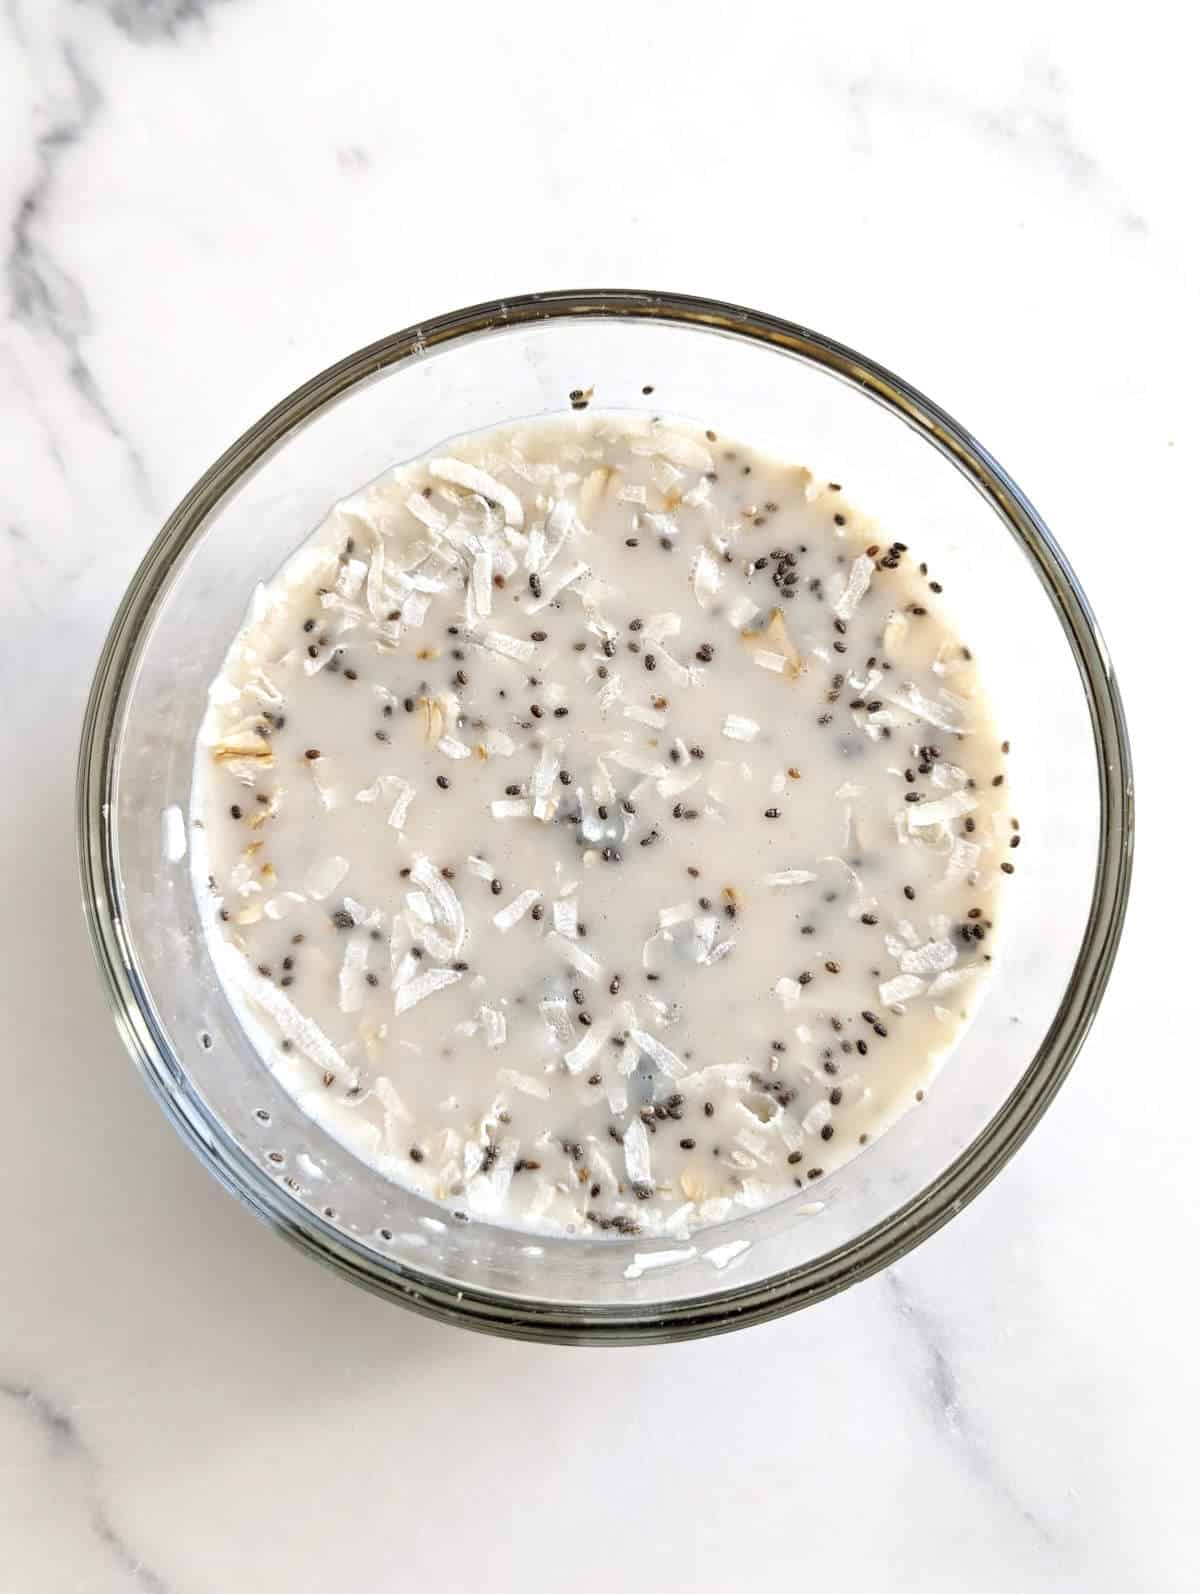 Coconut milk overnight oats ingredients mixed together in a bowl.